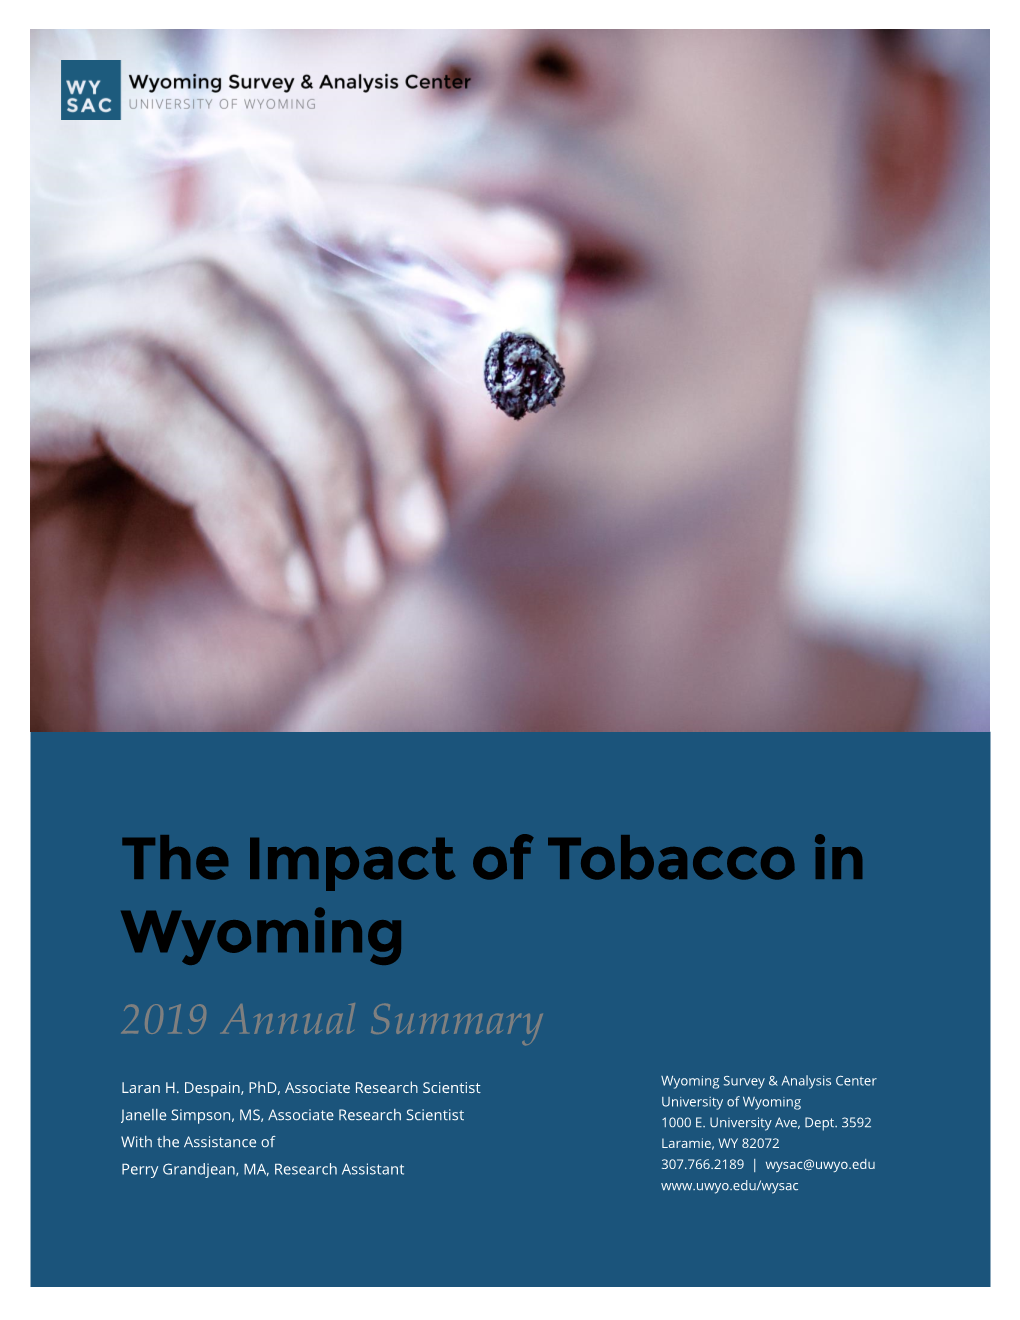 The Impact of Tobacco in Wyoming 2019 Annual Summary